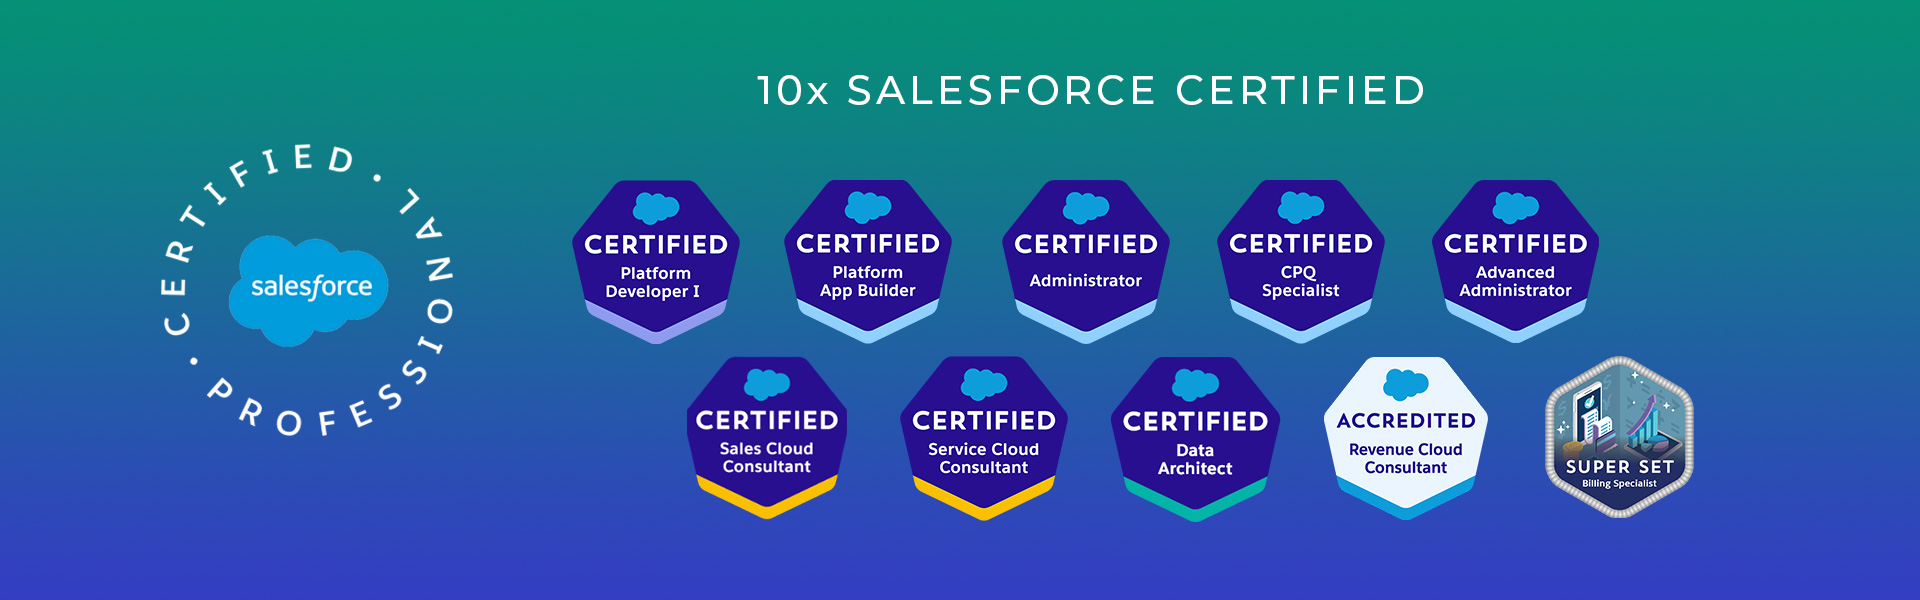 Salesforce-Home-Page-Banner-1